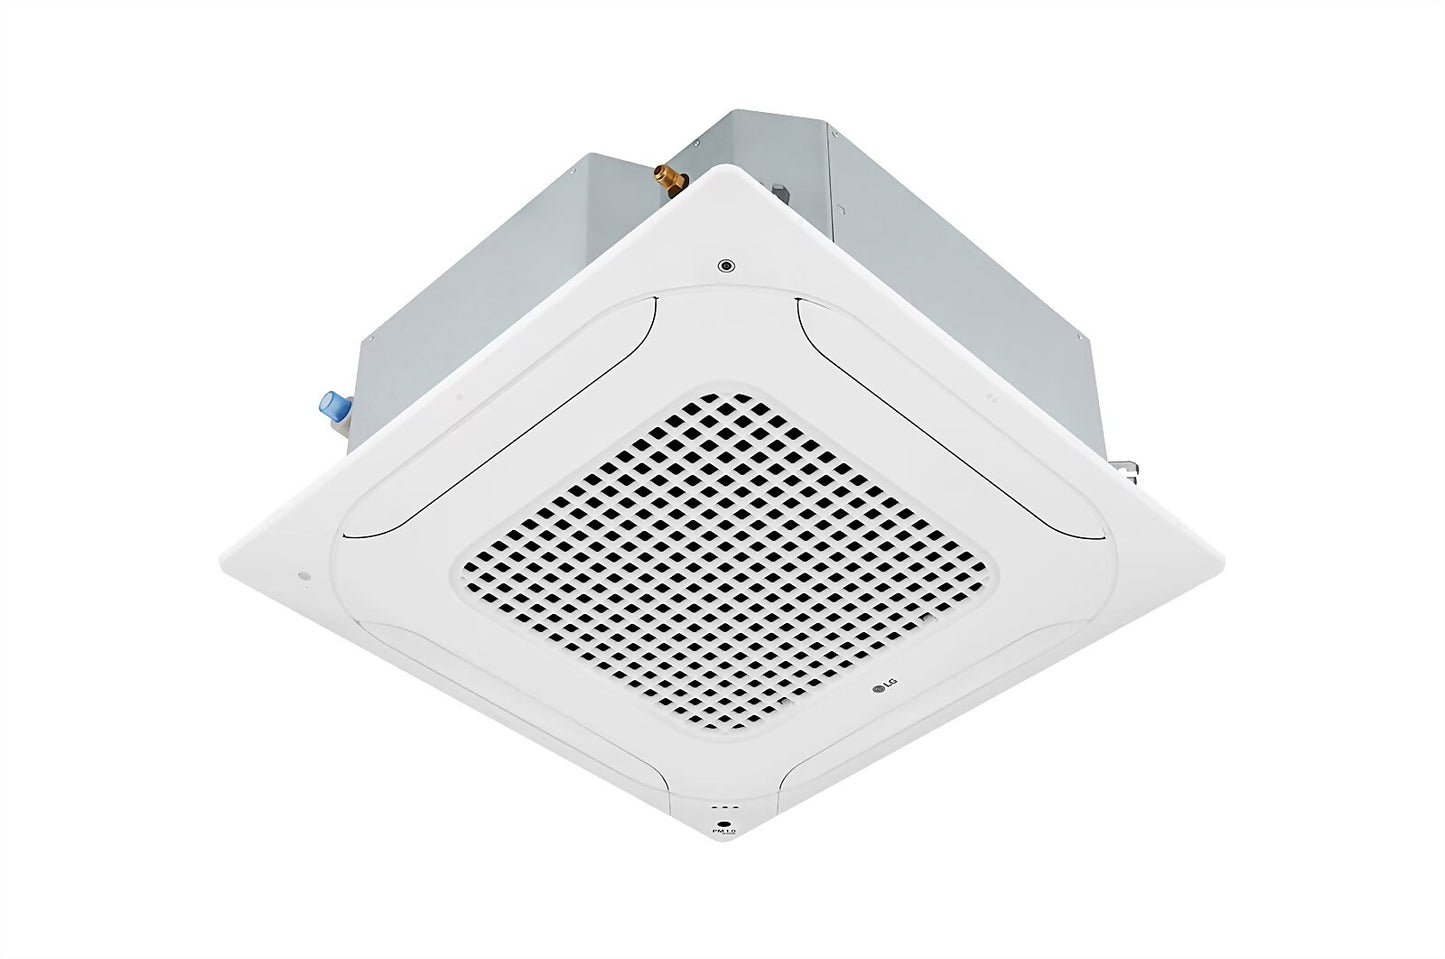 LG Ceiling Mounted 4 Way Cassette Inverter AC 10.6KW with Advanced Air Purification and Independent Vane Control - ARNU36GTNC2